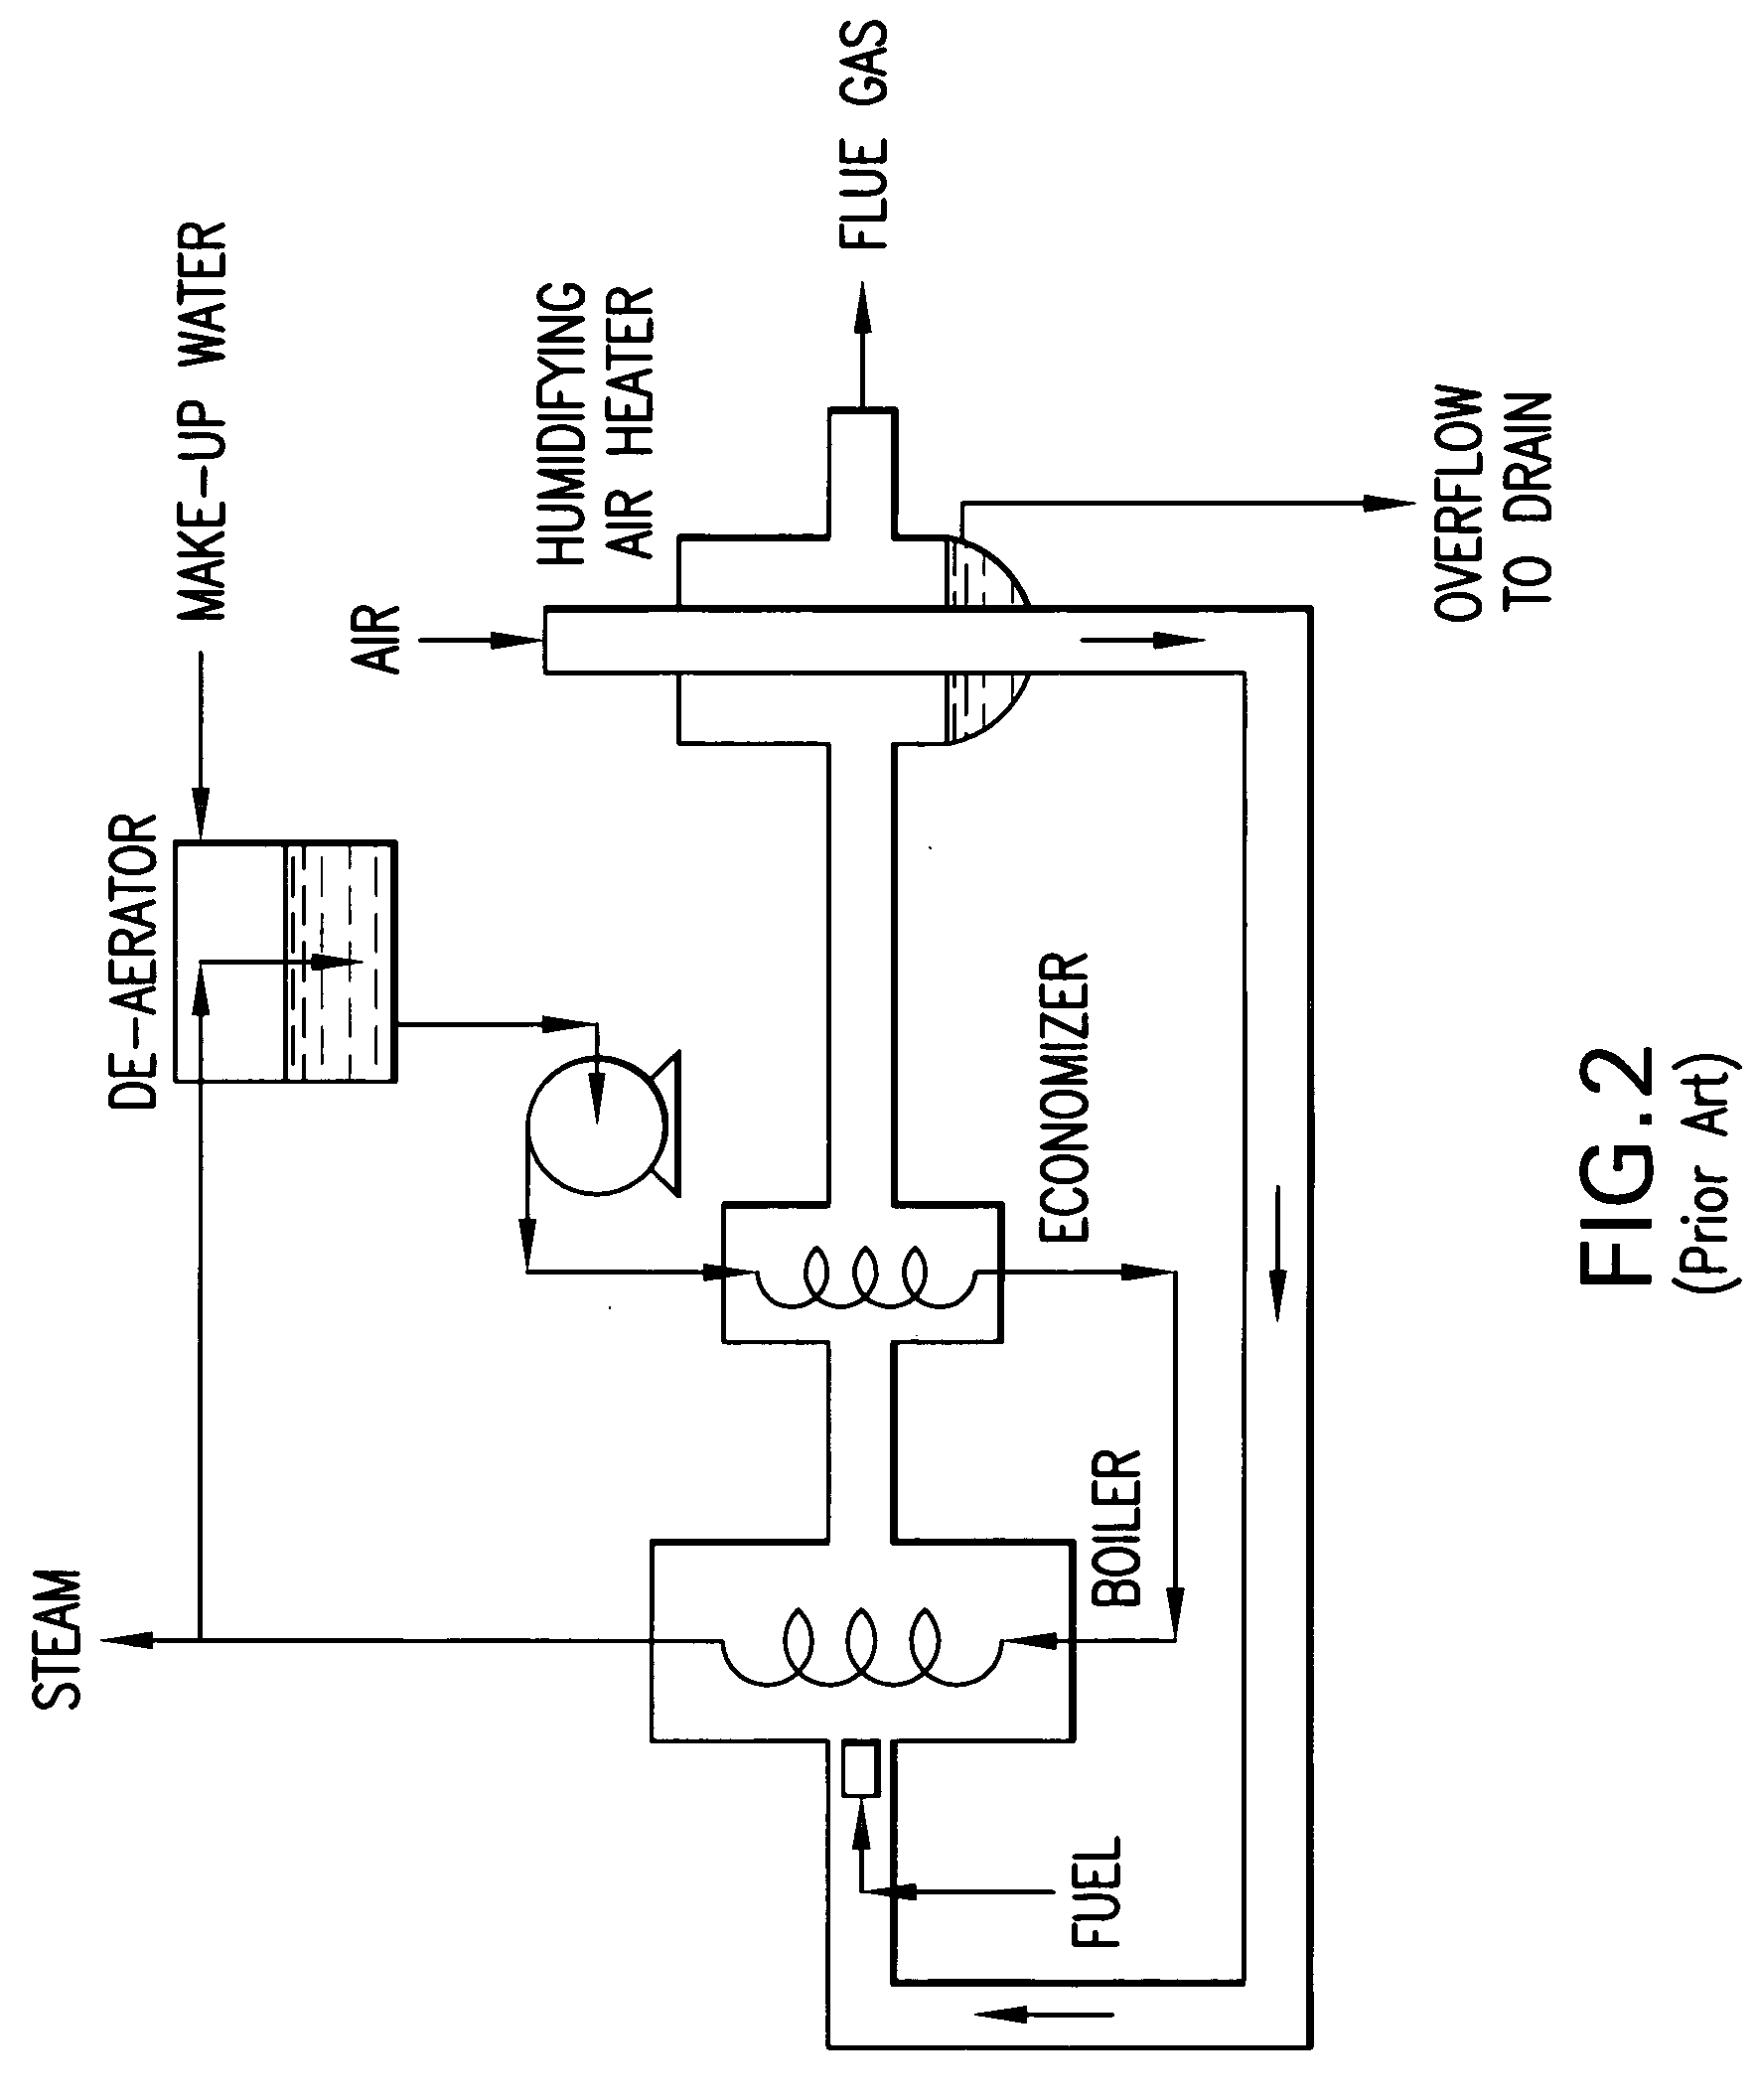 Method and apparatus for enhanced heat recovery from steam generators and water heaters